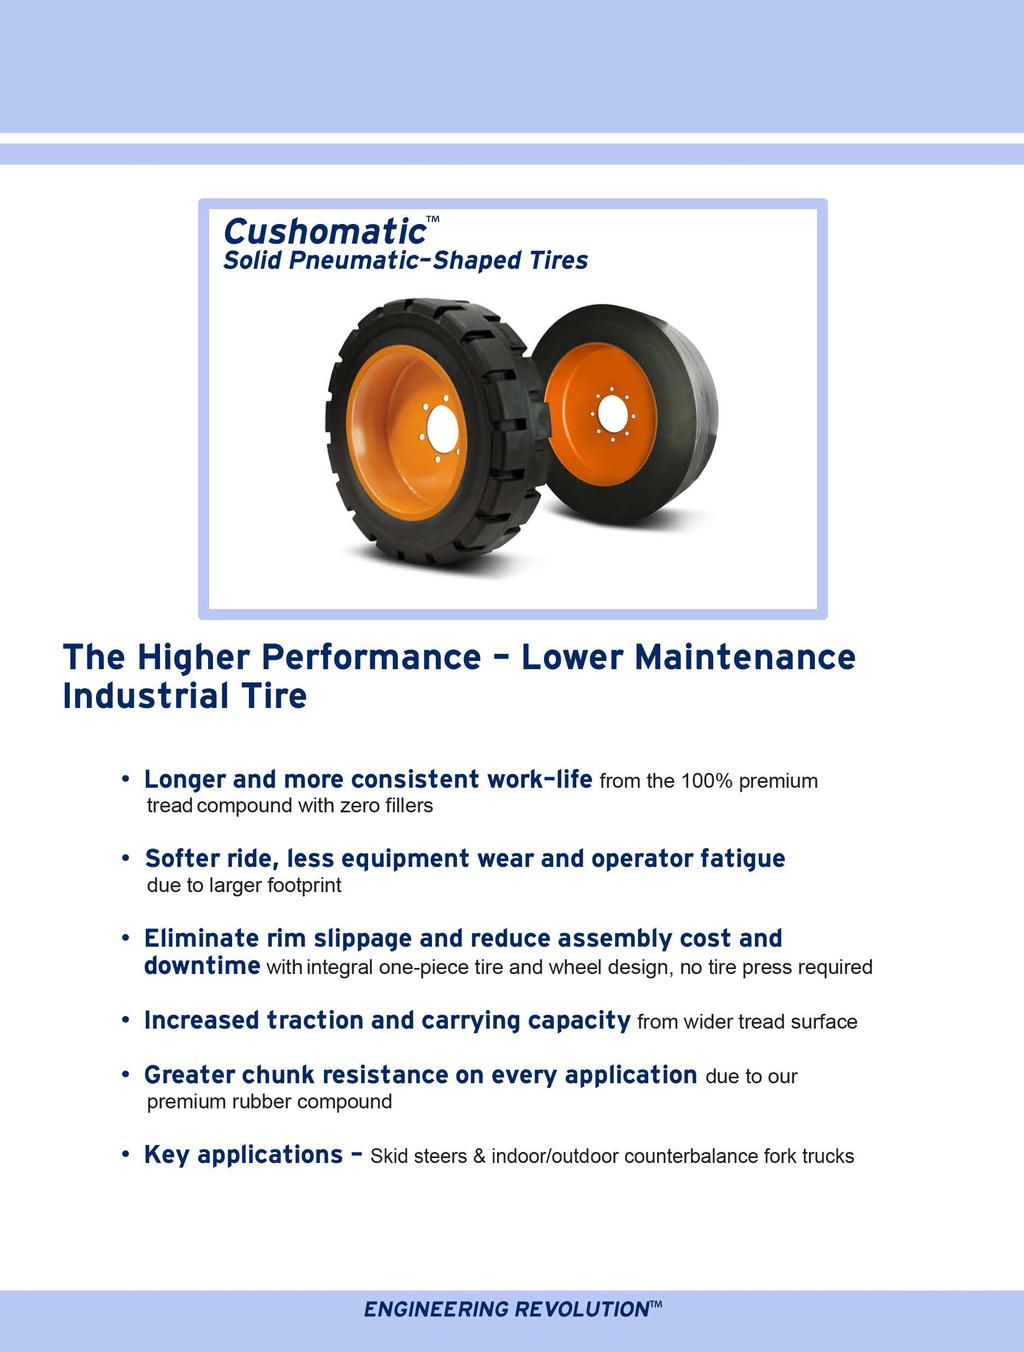 CushomaticTM Solid Pneumatic-Shaped Tires The Higher Performance- Lower Maintenance Industrial Tire Longer and more consistent work-life from the 100% premium tread compound with zero fillers Softer